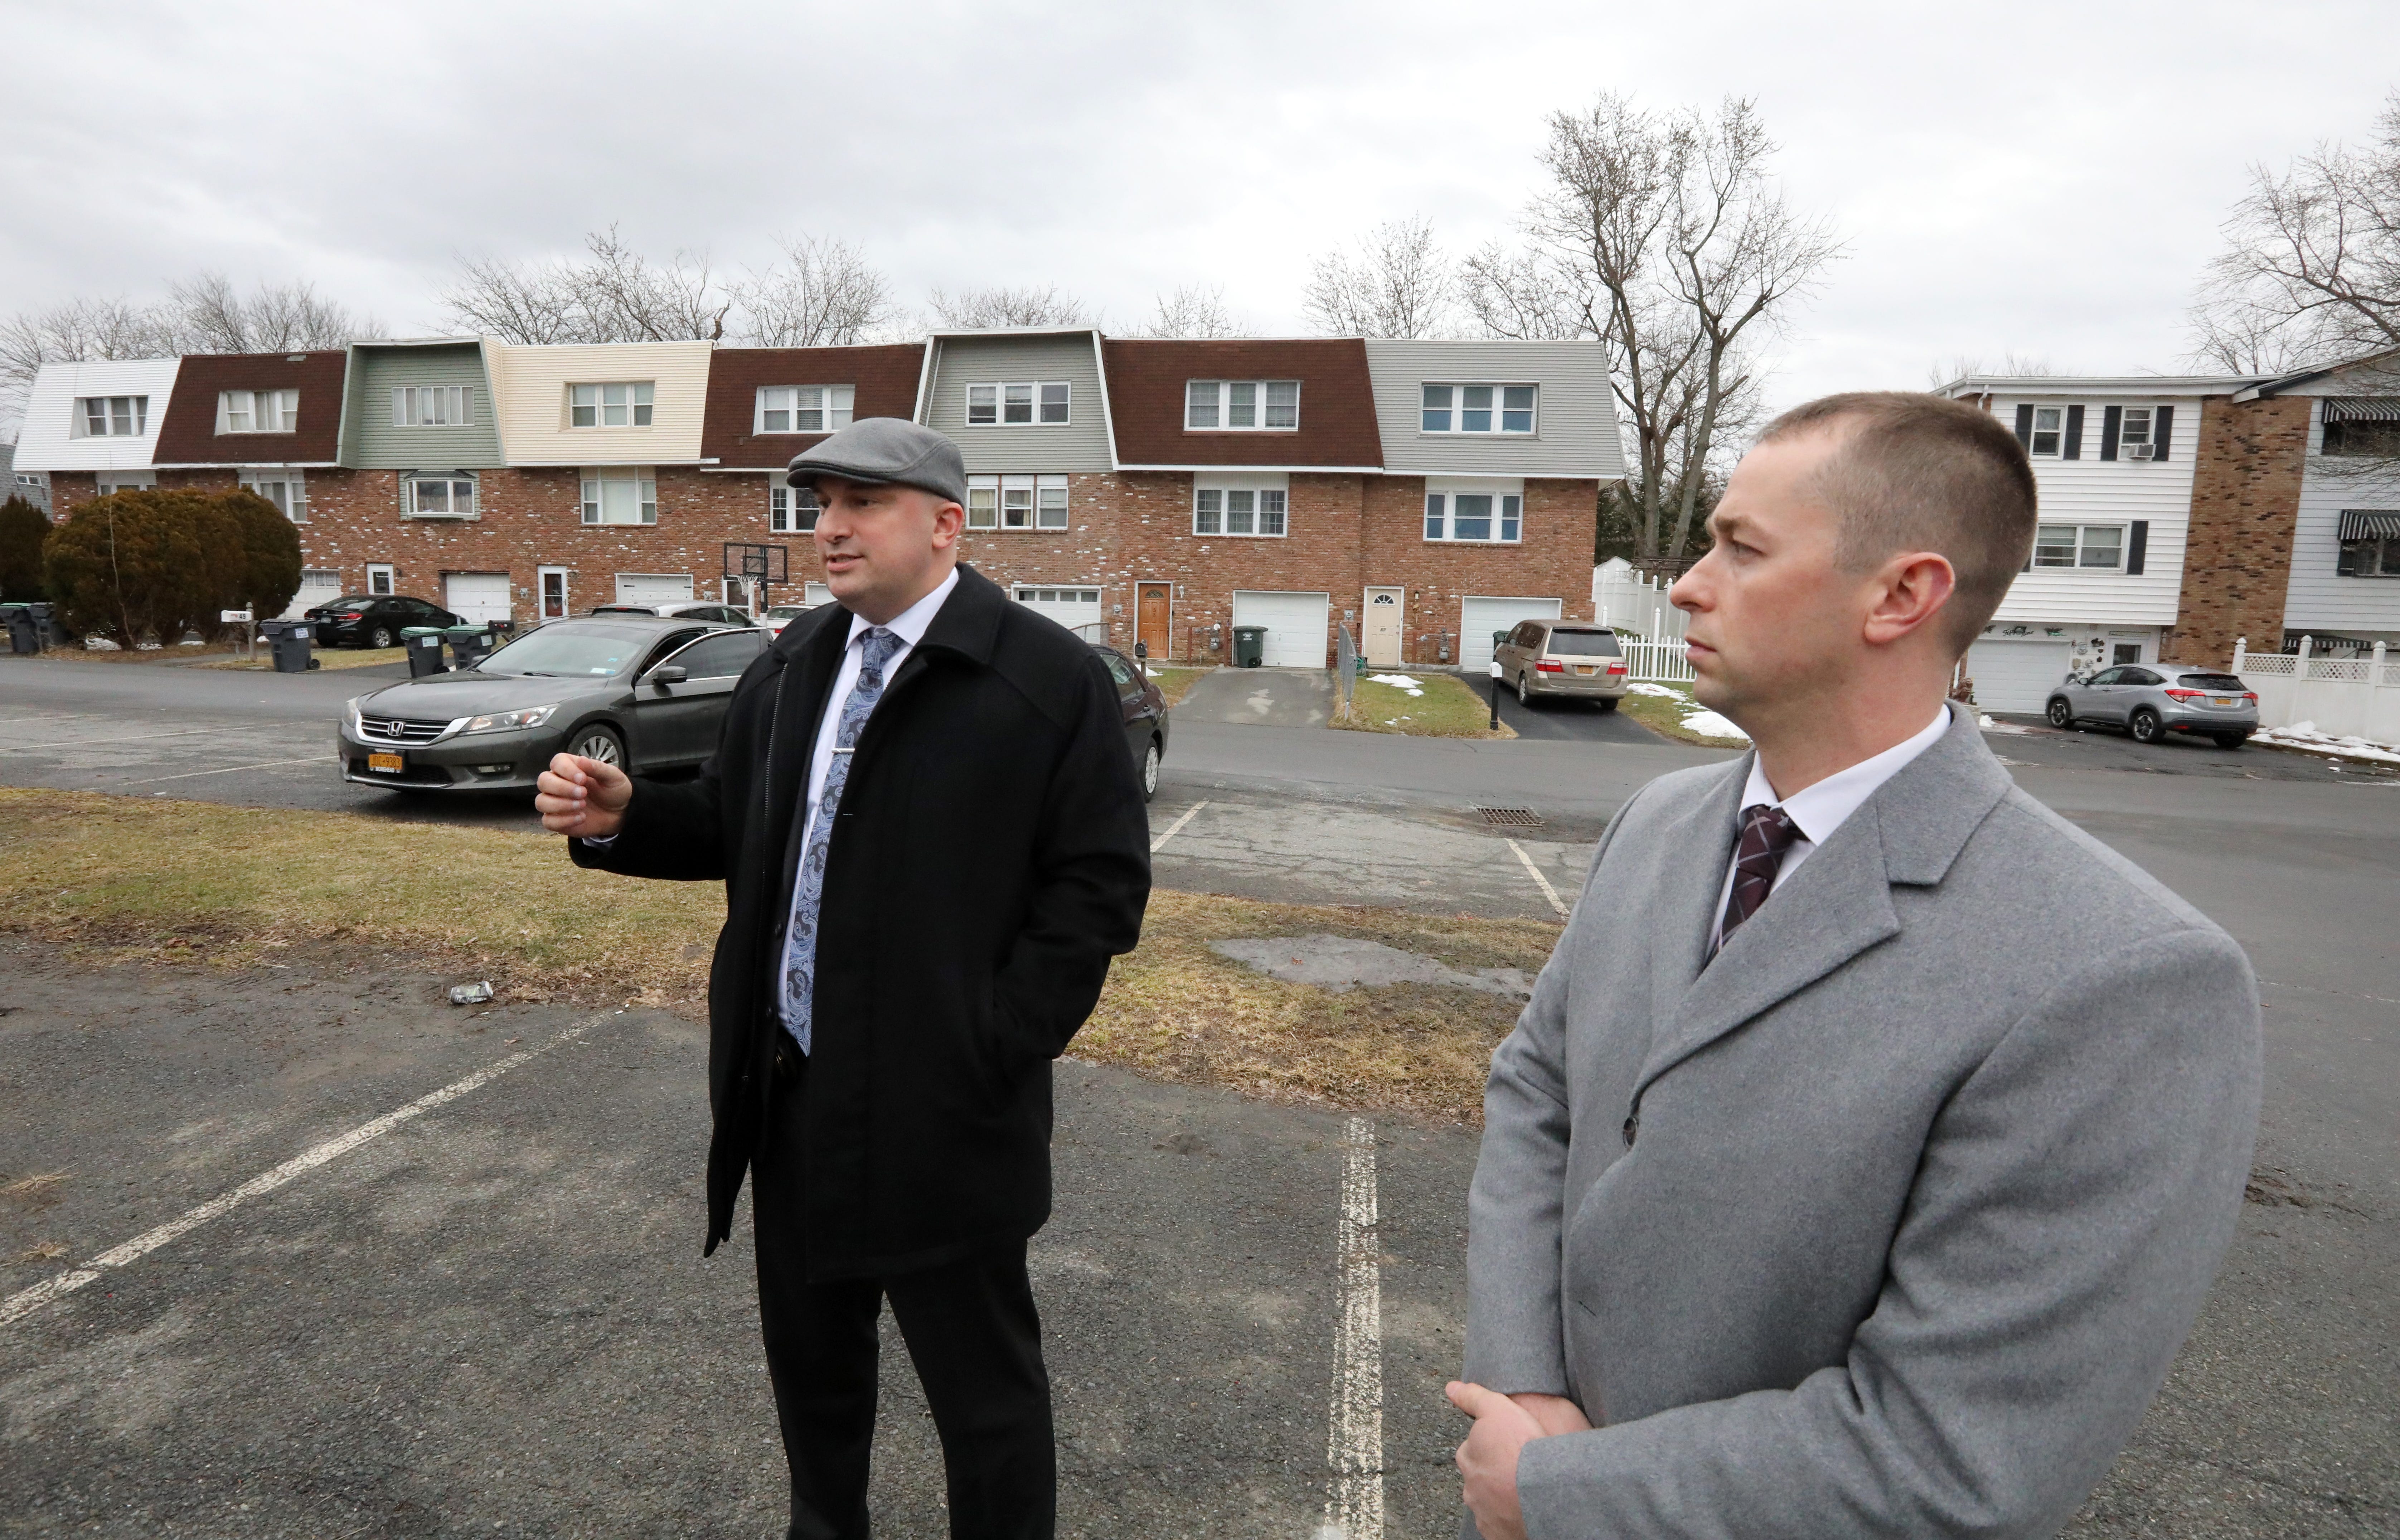 New York State Police Investigators Brad Natalizio, left, and Michael Corletta at Greenway Terrace in Middletown Feb. 17, 2022. Megan McDonald was seen there on the night of her disappearance.